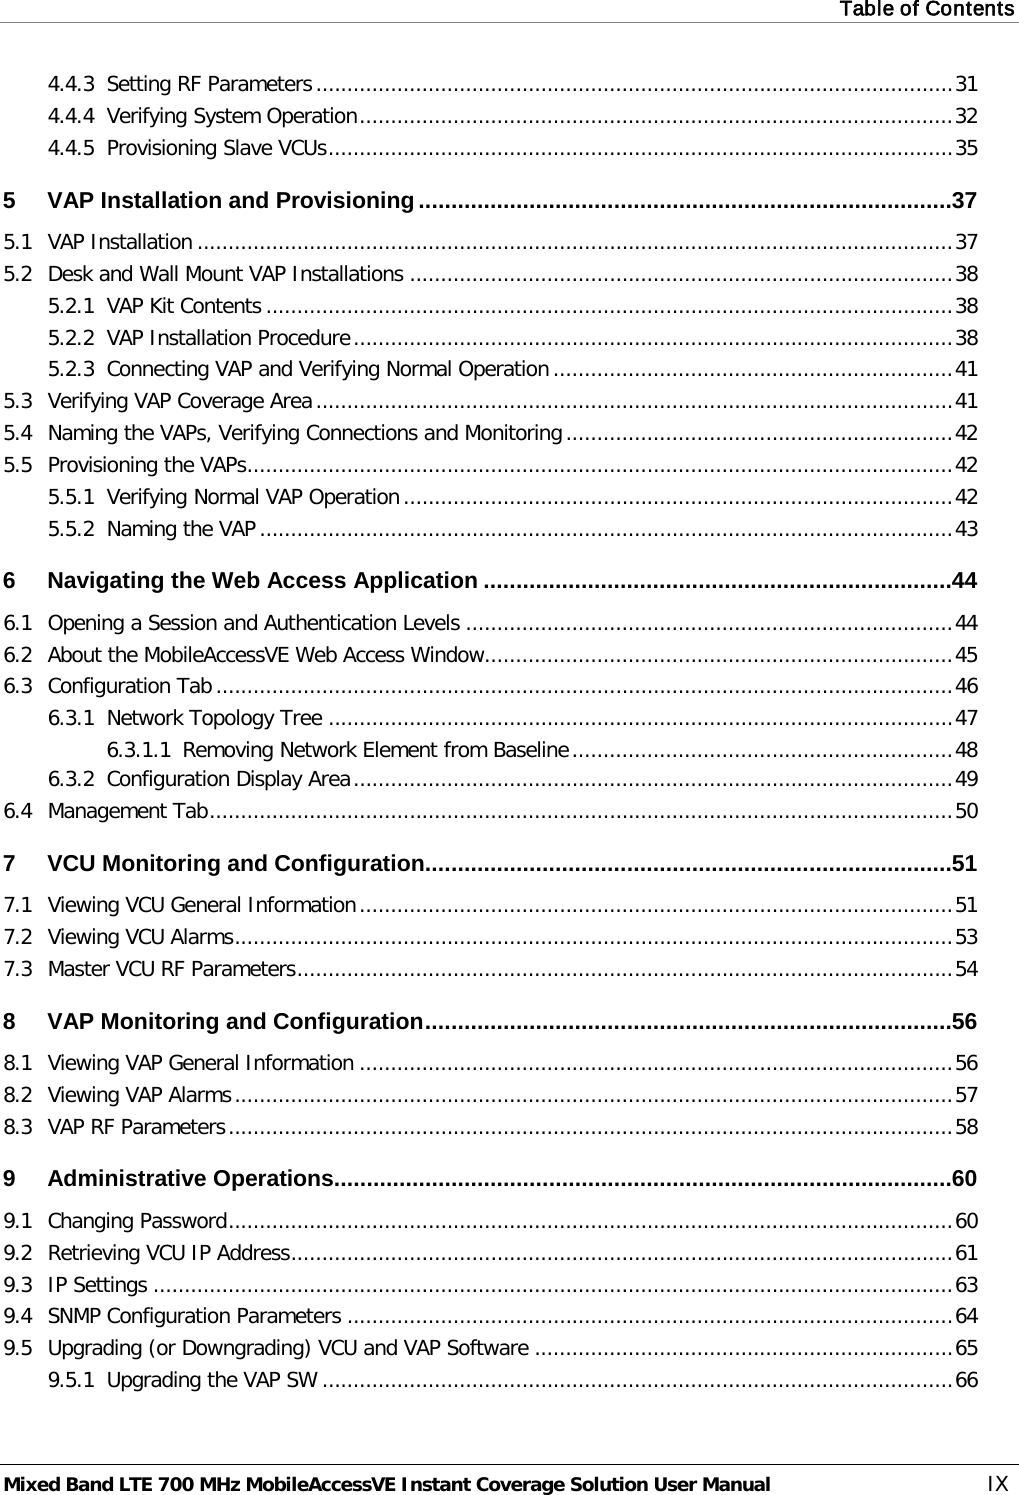 Table of Contents  Mixed Band LTE 700 MHz MobileAccessVE Instant Coverage Solution User Manual  IX 4.4.3 Setting RF Parameters ...................................................................................................... 31 4.4.4 Verifying System Operation ............................................................................................... 32 4.4.5 Provisioning Slave VCUs .................................................................................................... 35 5 VAP Installation and Provisioning .................................................................................. 37 5.1 VAP Installation ......................................................................................................................... 37 5.2 Desk and Wall Mount VAP Installations ....................................................................................... 38 5.2.1 VAP Kit Contents .............................................................................................................. 38 5.2.2 VAP Installation Procedure ................................................................................................ 38 5.2.3 Connecting VAP and Verifying Normal Operation ................................................................ 41 5.3 Verifying VAP Coverage Area ...................................................................................................... 41 5.4 Naming the VAPs, Verifying Connections and Monitoring .............................................................. 42 5.5 Provisioning the VAPs ................................................................................................................. 42 5.5.1 Verifying Normal VAP Operation ........................................................................................ 42 5.5.2 Naming the VAP ............................................................................................................... 43 6 Navigating the Web Access Application ........................................................................ 44 6.1 Opening a Session and Authentication Levels .............................................................................. 44 6.2 About the MobileAccessVE Web Access Window........................................................................... 45 6.3 Configuration Tab ...................................................................................................................... 46 6.3.1 Network Topology Tree .................................................................................................... 47 6.3.1.1 Removing Network Element from Baseline ............................................................. 48 6.3.2 Configuration Display Area ................................................................................................ 49 6.4 Management Tab ....................................................................................................................... 50 7 VCU Monitoring and Configuration ................................................................................. 51 7.1 Viewing VCU General Information ............................................................................................... 51 7.2 Viewing VCU Alarms ................................................................................................................... 53 7.3 Master VCU RF Parameters ......................................................................................................... 54 8 VAP Monitoring and Configuration ................................................................................. 56 8.1 Viewing VAP General Information ............................................................................................... 56 8.2 Viewing VAP Alarms ................................................................................................................... 57 8.3 VAP RF Parameters .................................................................................................................... 58 9 Administrative Operations............................................................................................... 60 9.1 Changing Password .................................................................................................................... 60 9.2 Retrieving VCU IP Address .......................................................................................................... 61 9.3 IP Settings ................................................................................................................................ 63 9.4 SNMP Configuration Parameters ................................................................................................. 64 9.5 Upgrading (or Downgrading) VCU and VAP Software ................................................................... 65 9.5.1 Upgrading the VAP SW ..................................................................................................... 66 